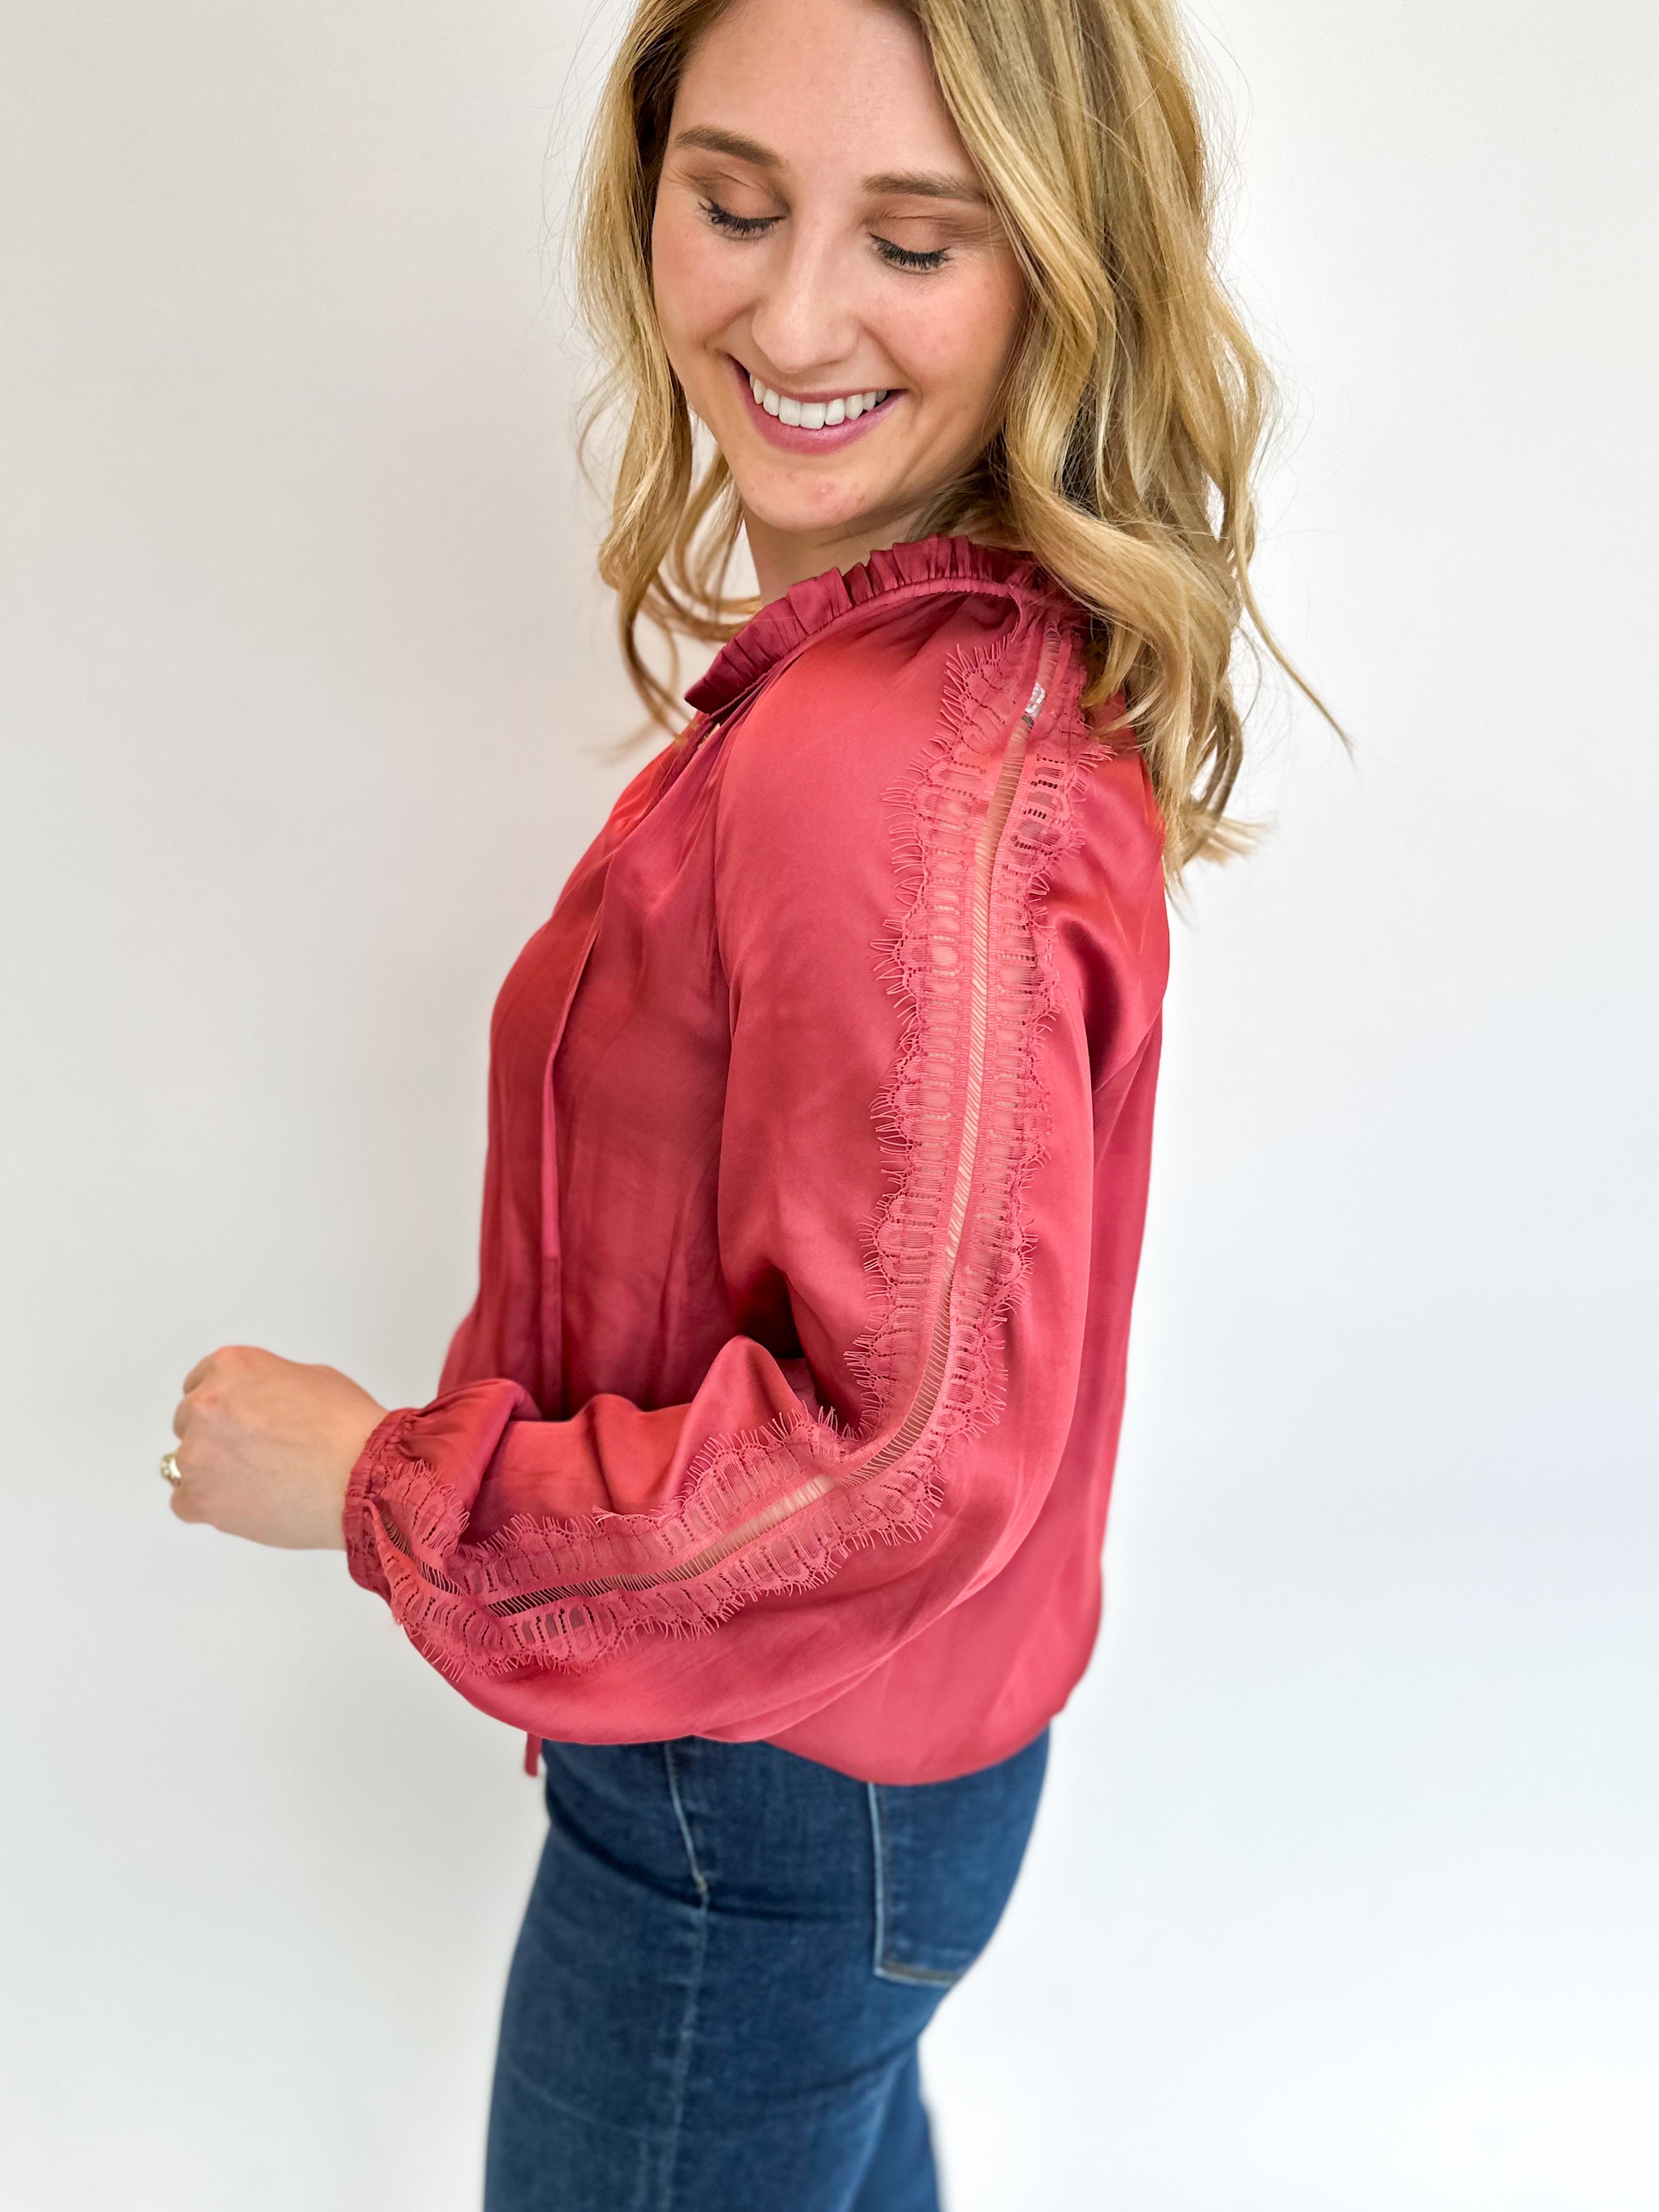 Lacey Details Blouse - Pink Red-200 Fashion Blouses-CURRENT AIR CLOTHING-July & June Women's Fashion Boutique Located in San Antonio, Texas